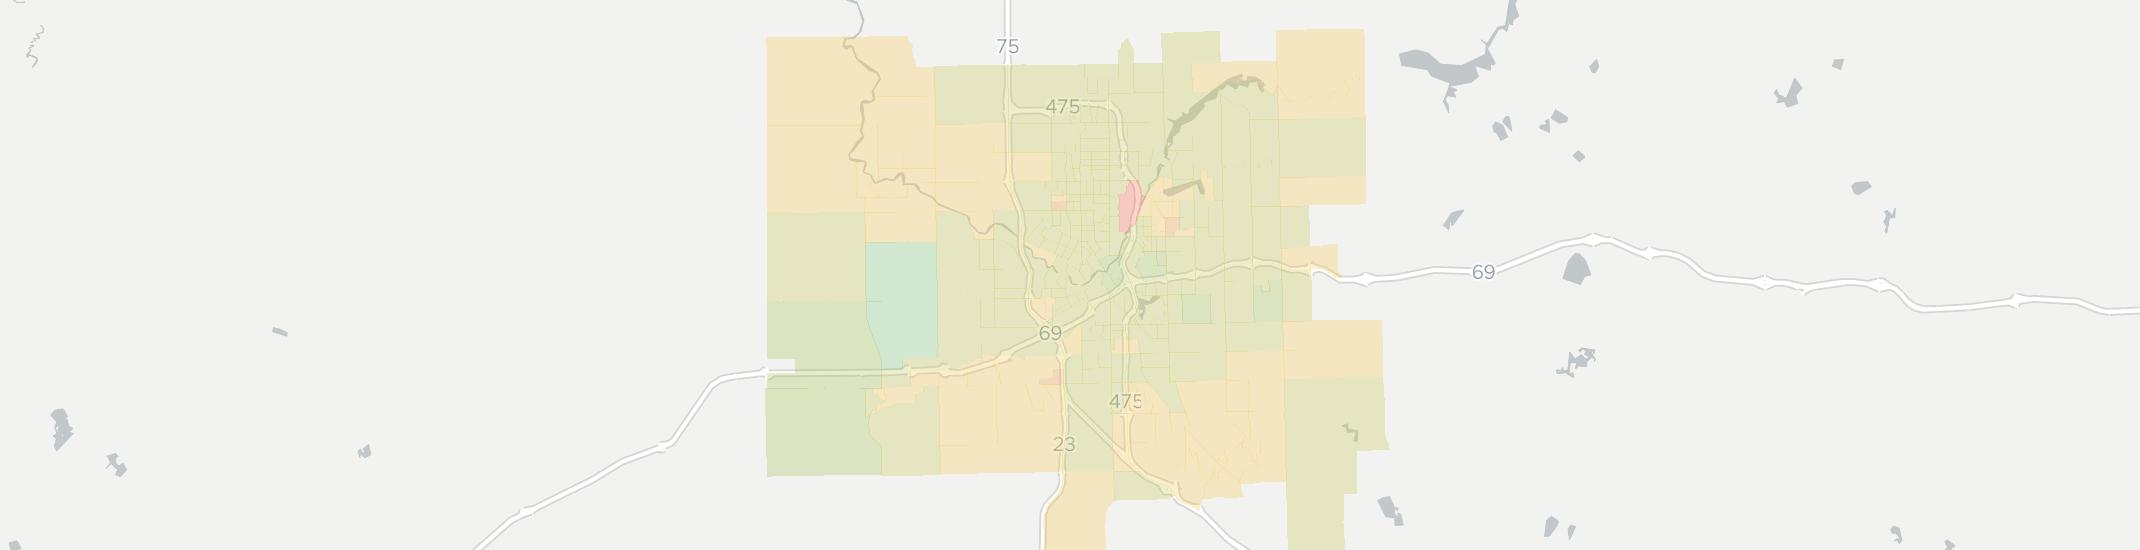 Flint Internet Competition Map. Click for interactive map